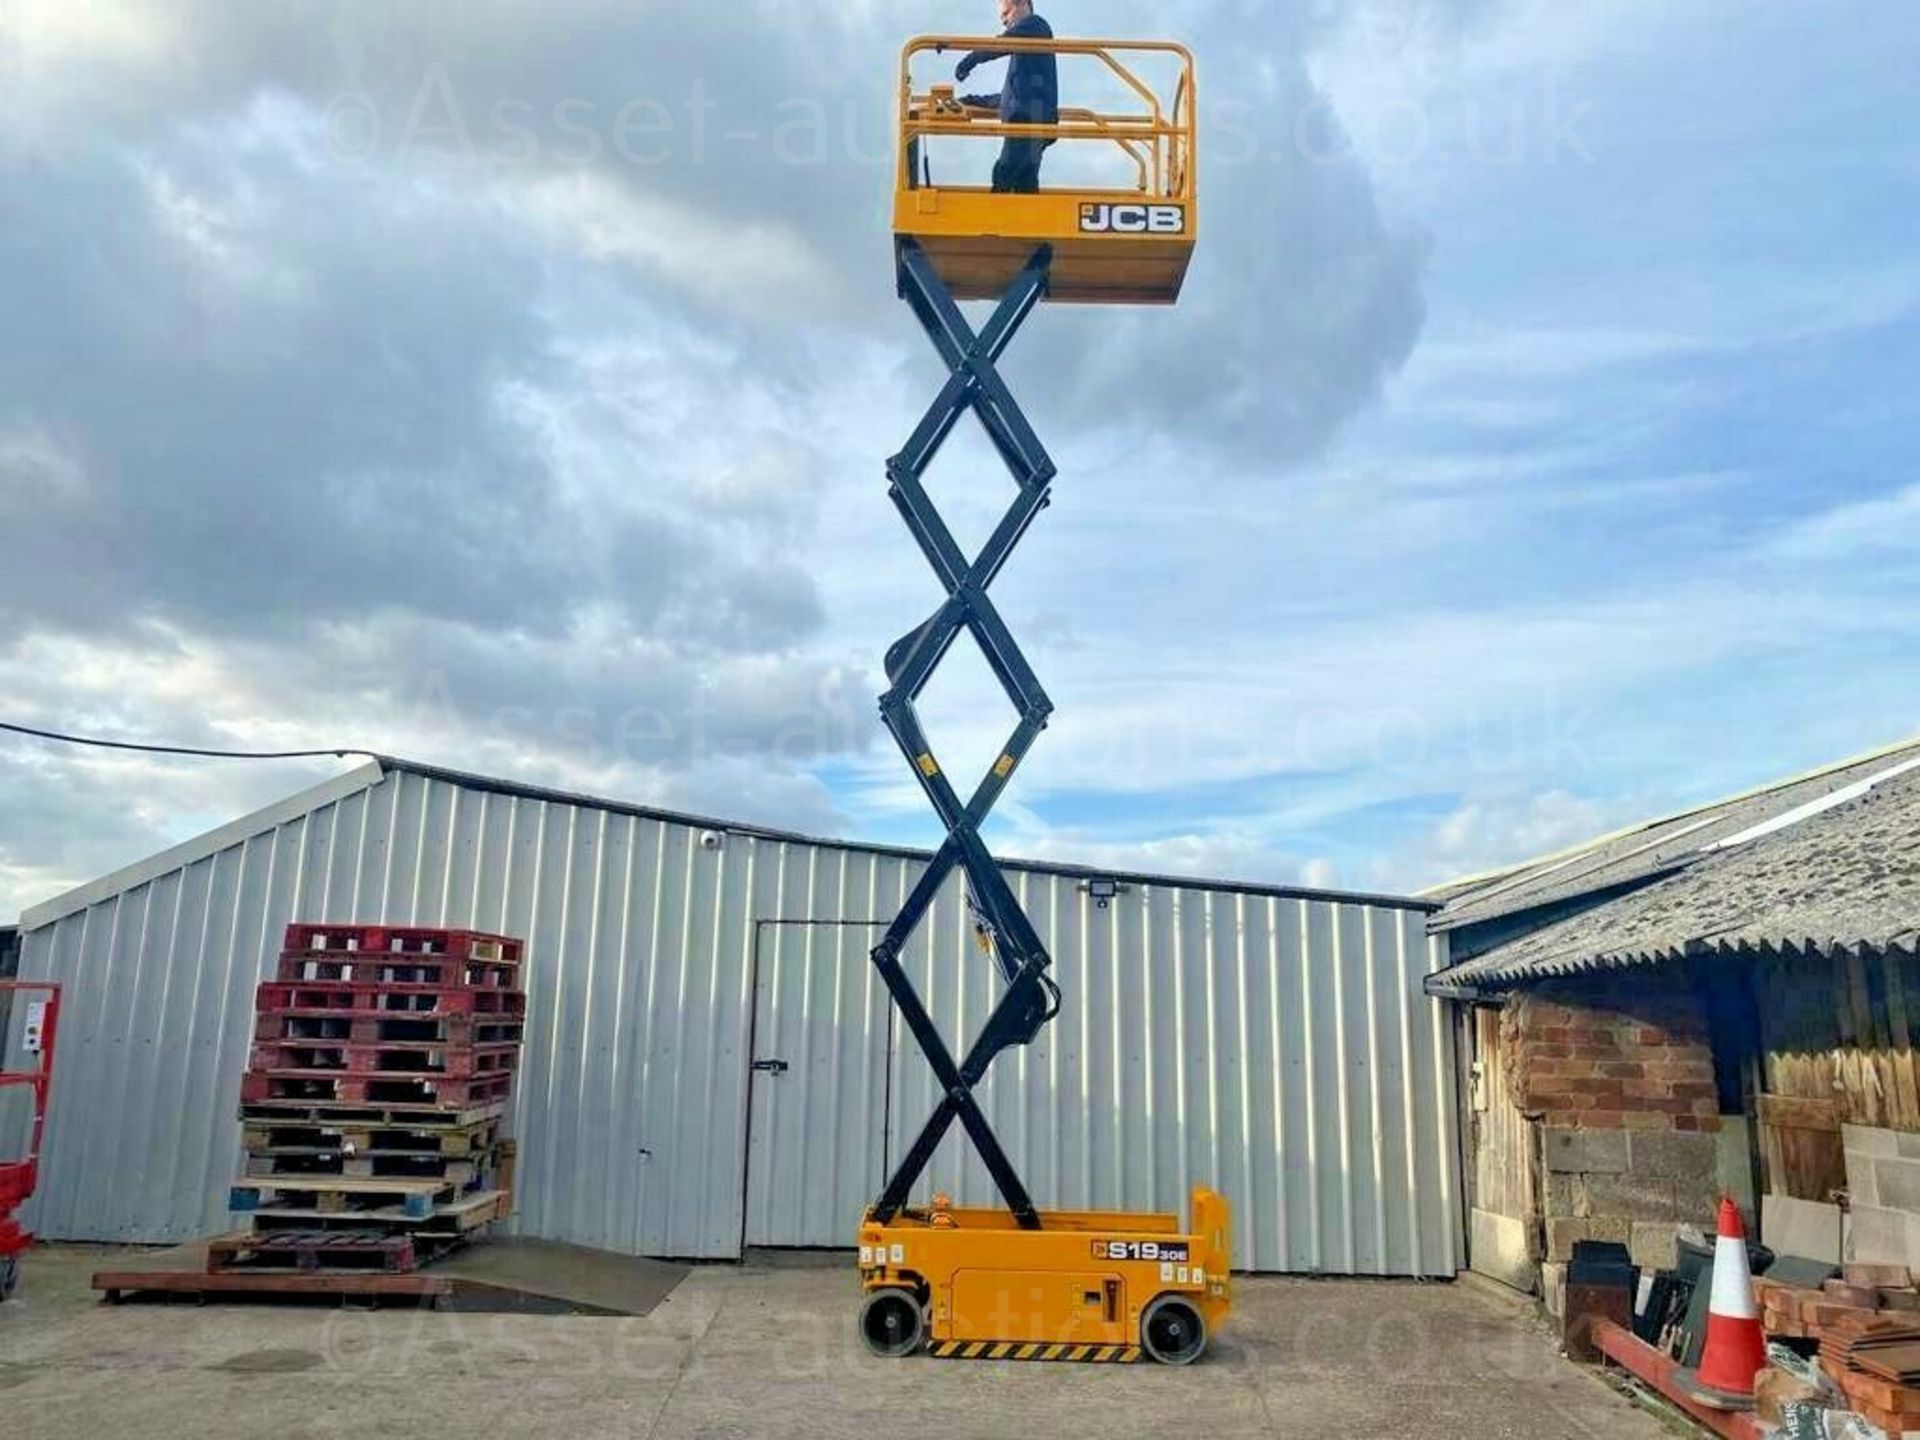 SCISSOR LIFT JCB S1930E ELECTRIC, PLATFORM HEIGHT 5.8m/ 19ft, ONLY 98.4 HOURS, YEAR 2018 *PLUS VAT* - Image 10 of 14